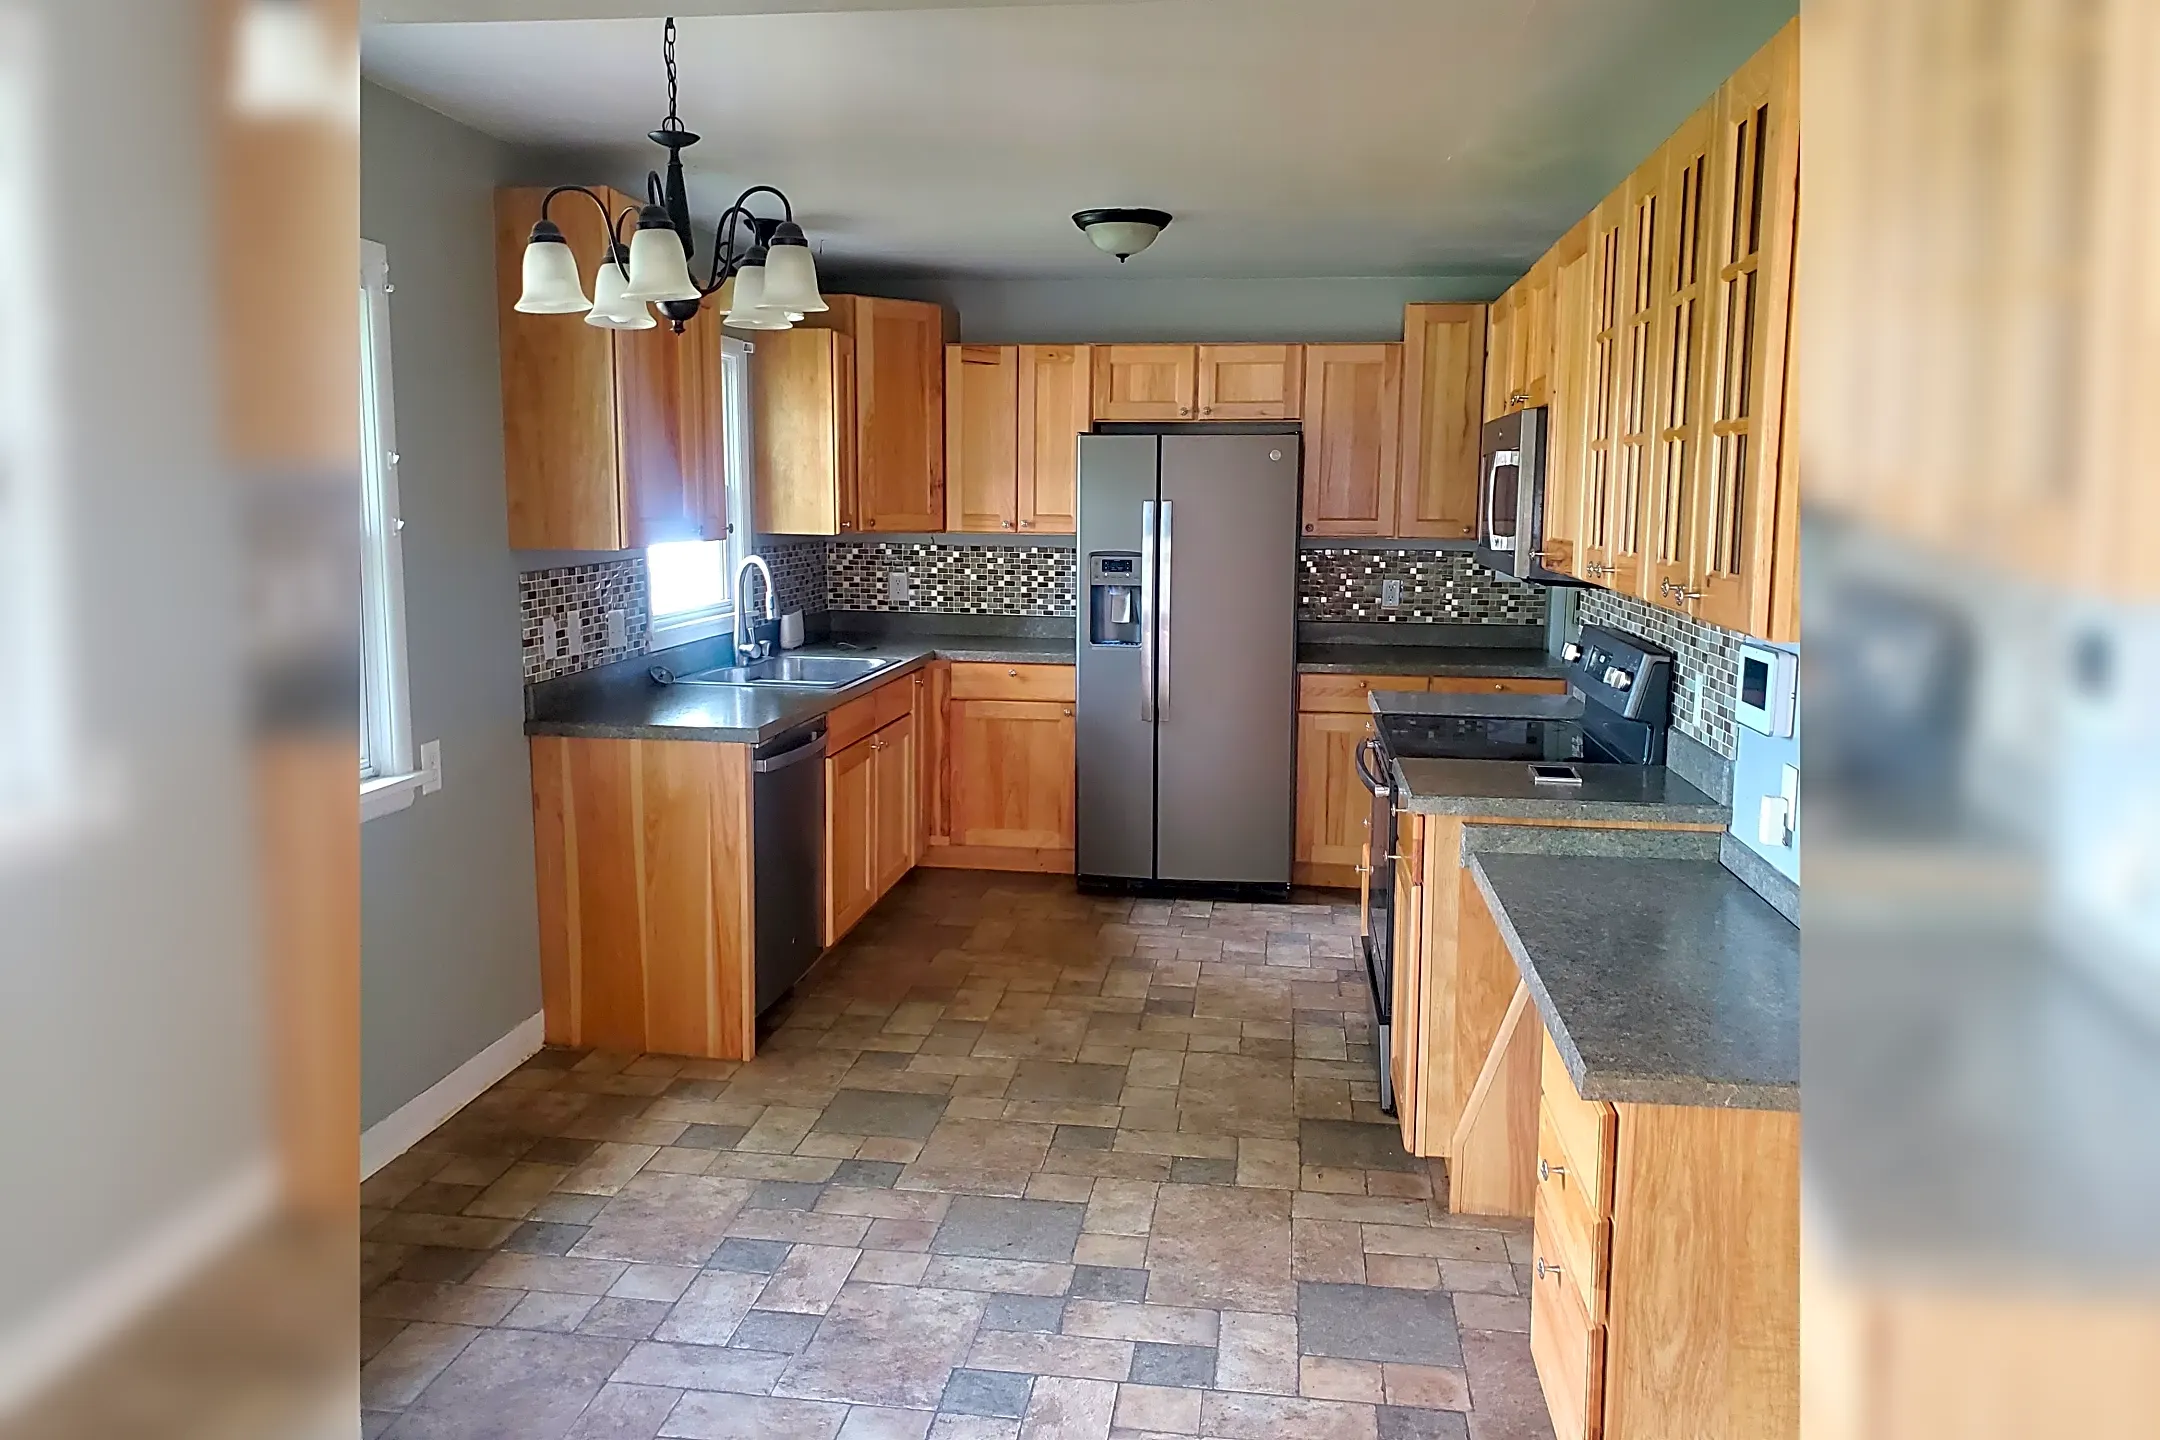 Kitchen - 3825 4th Ave N - Great Falls, MT